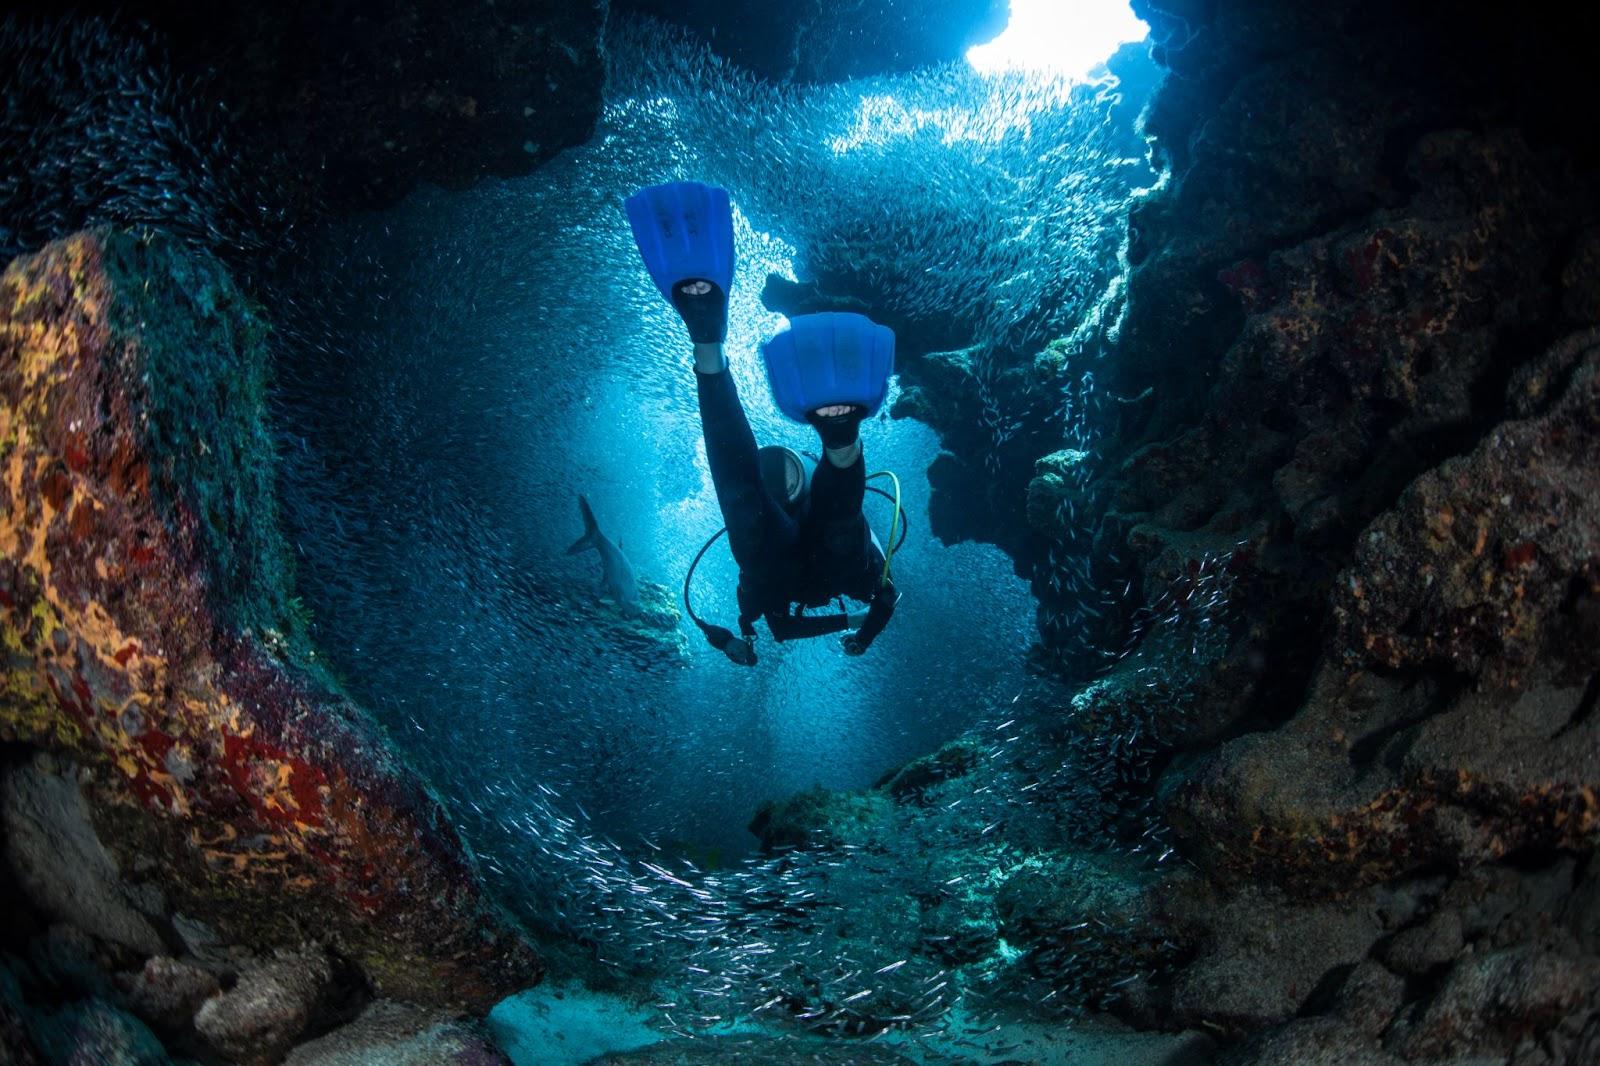 A diver explores the cracks, crevices and holes in a coral reef on the island of Grand Cayman.